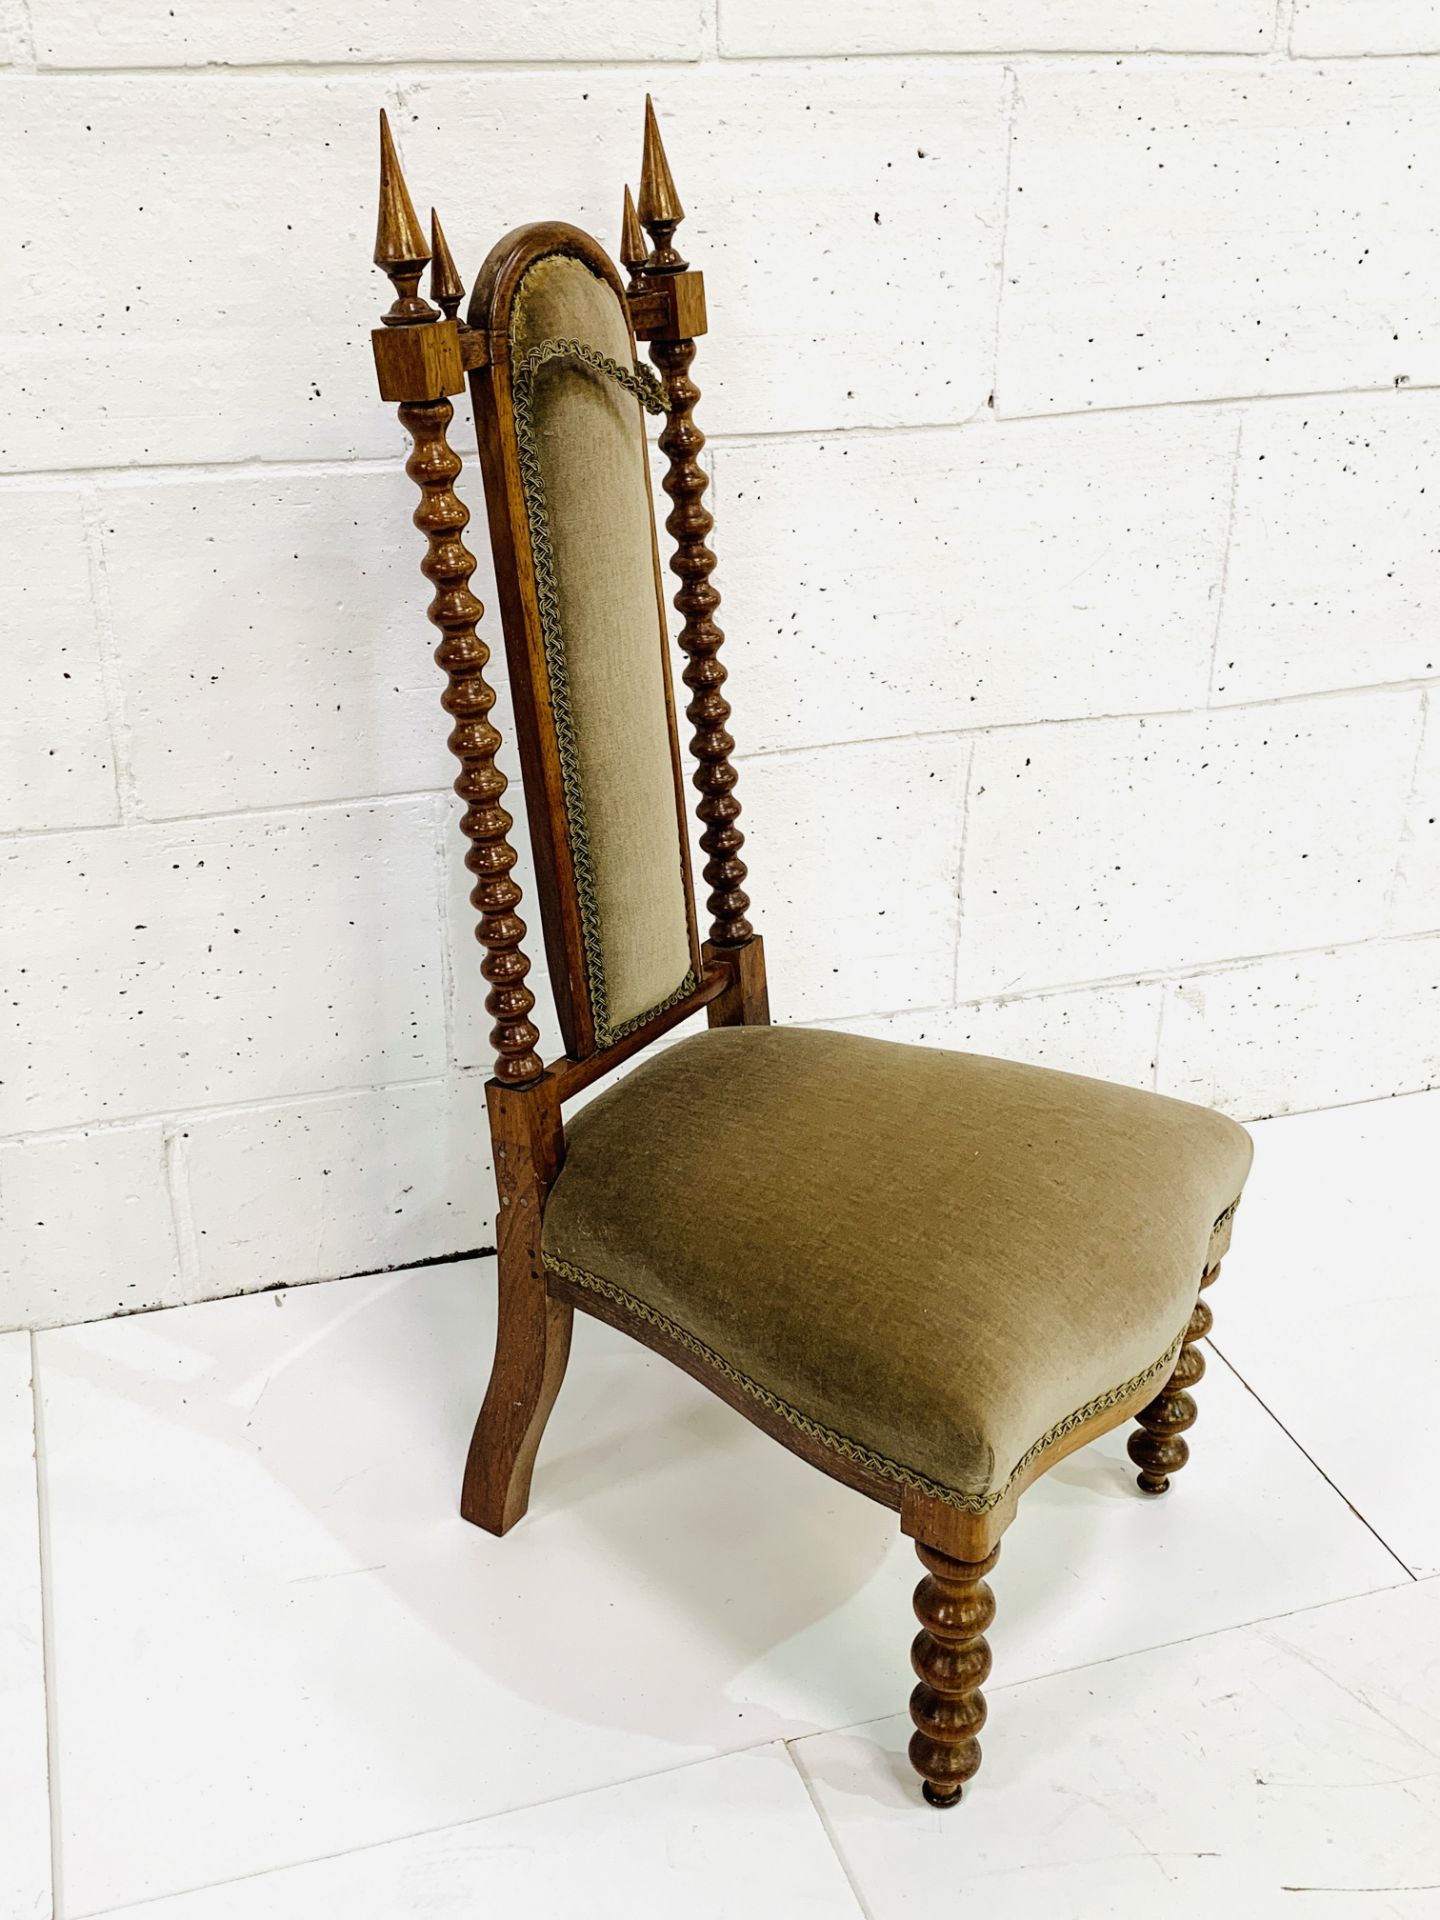 Upholstered decorative hall chair - Image 4 of 4